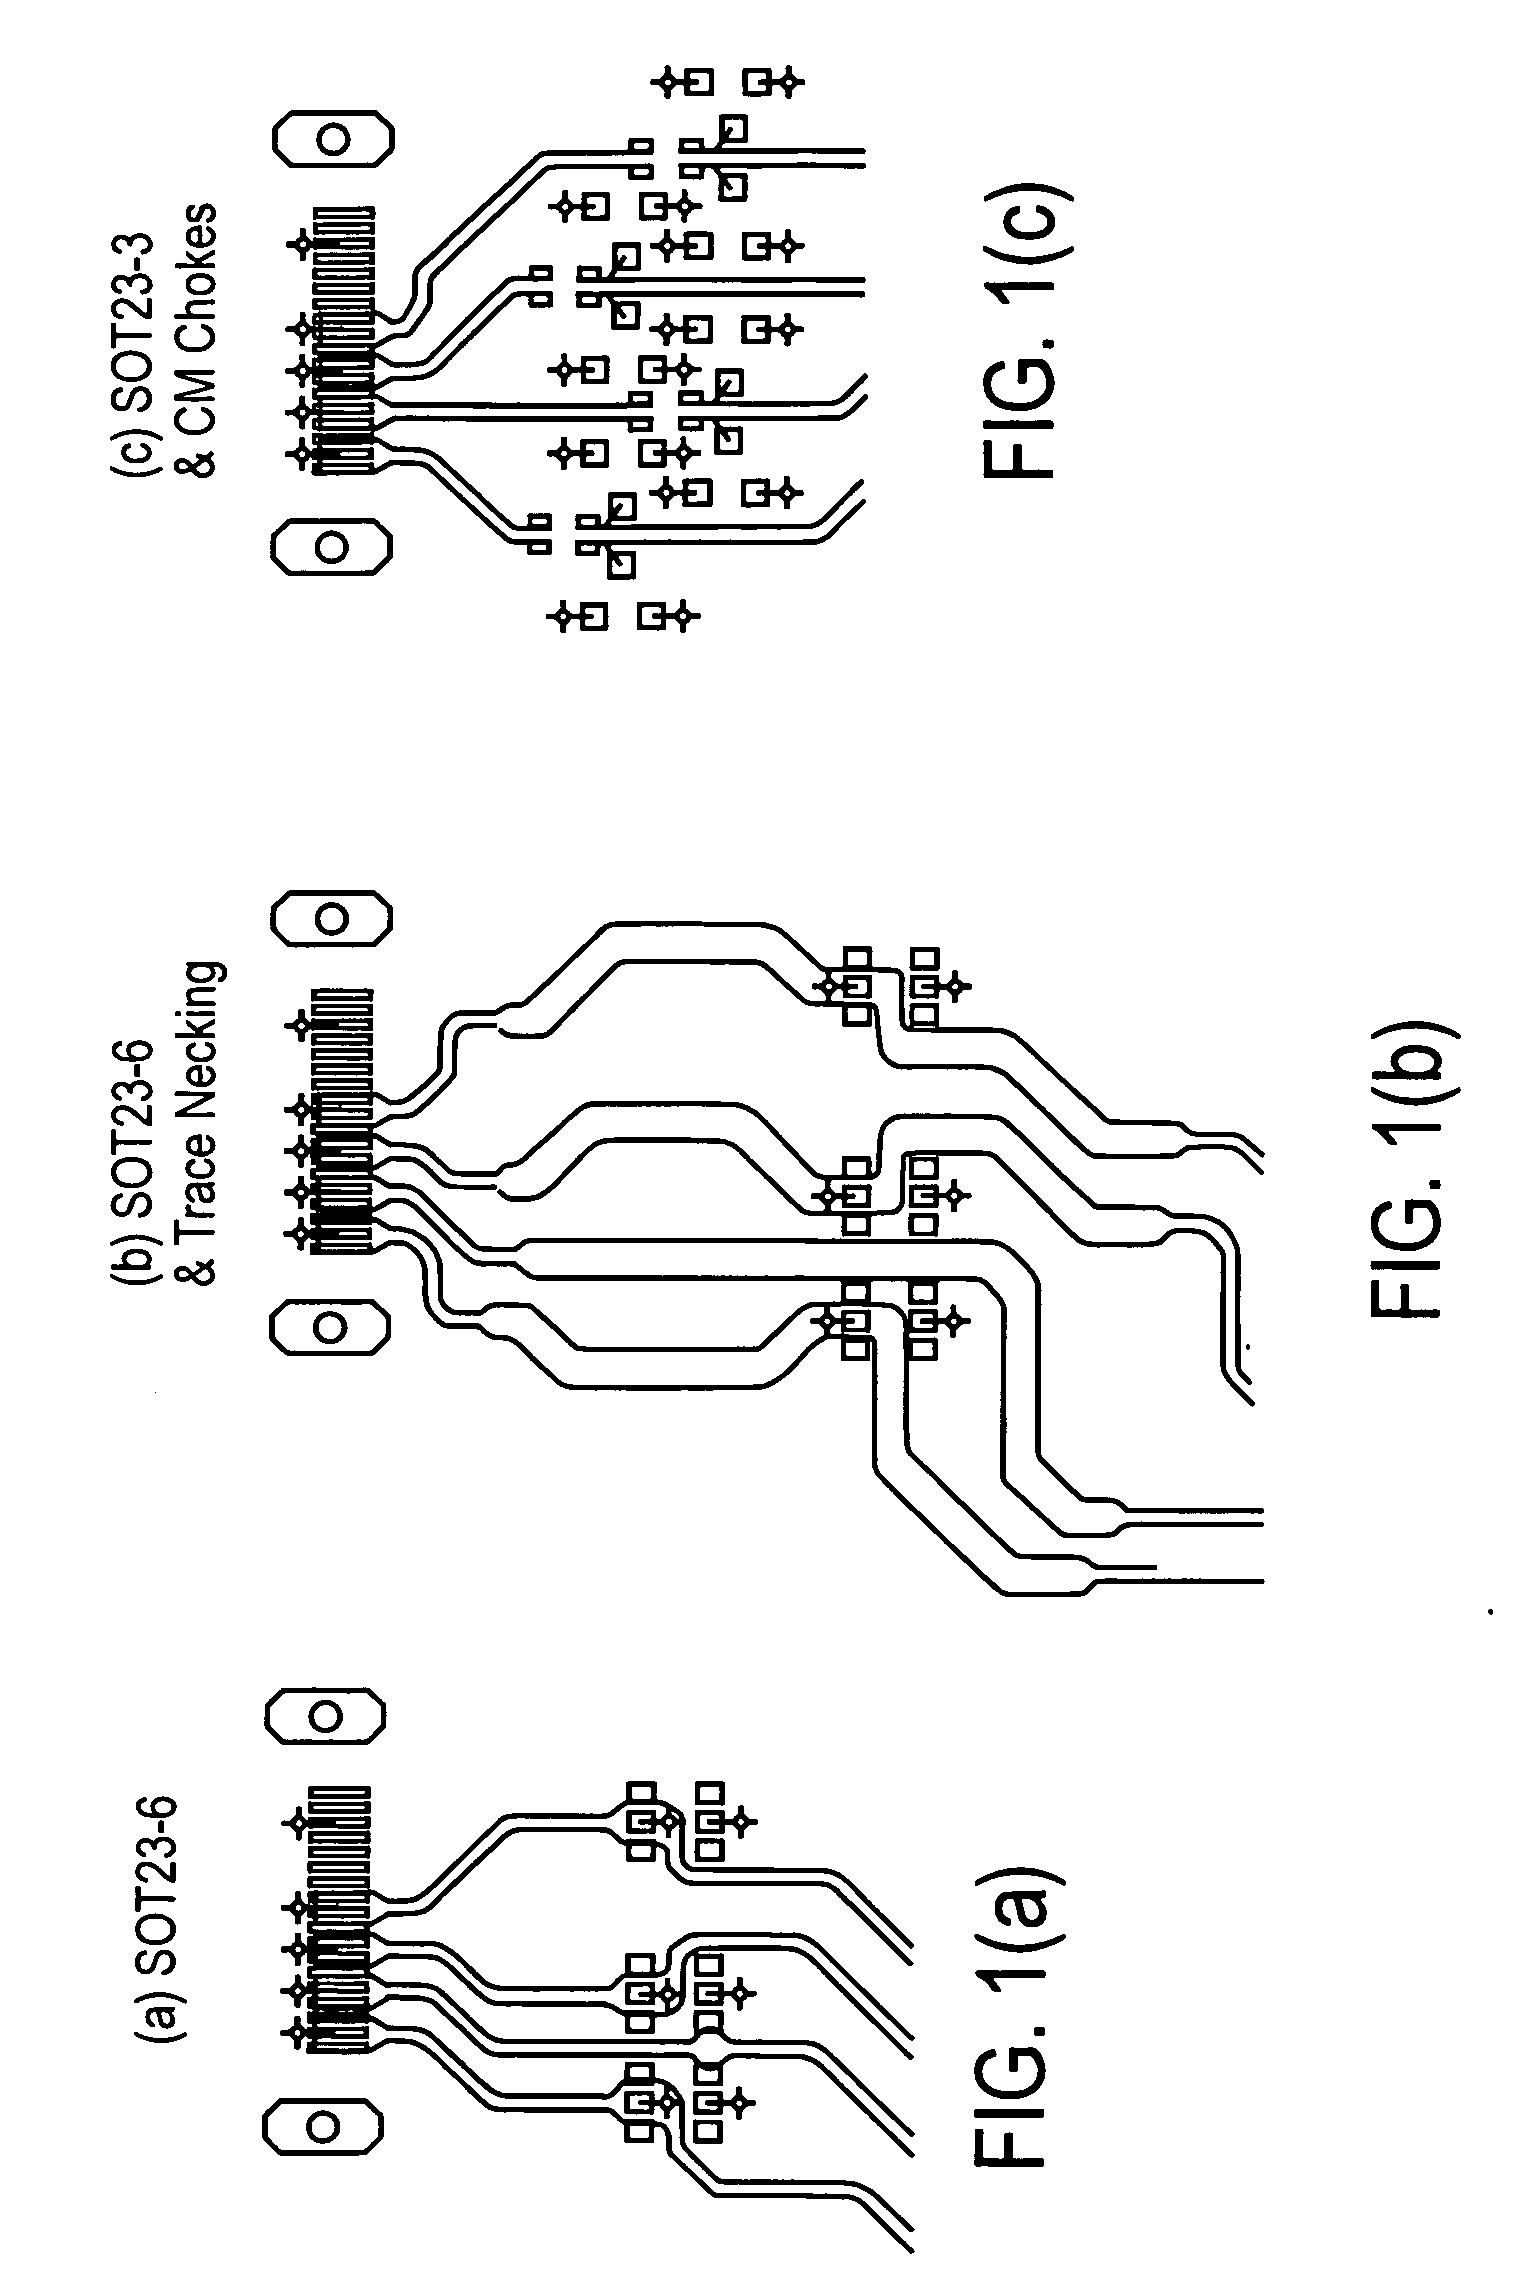 Method and apparatus that provides differential connections with improved ESD protection and routing